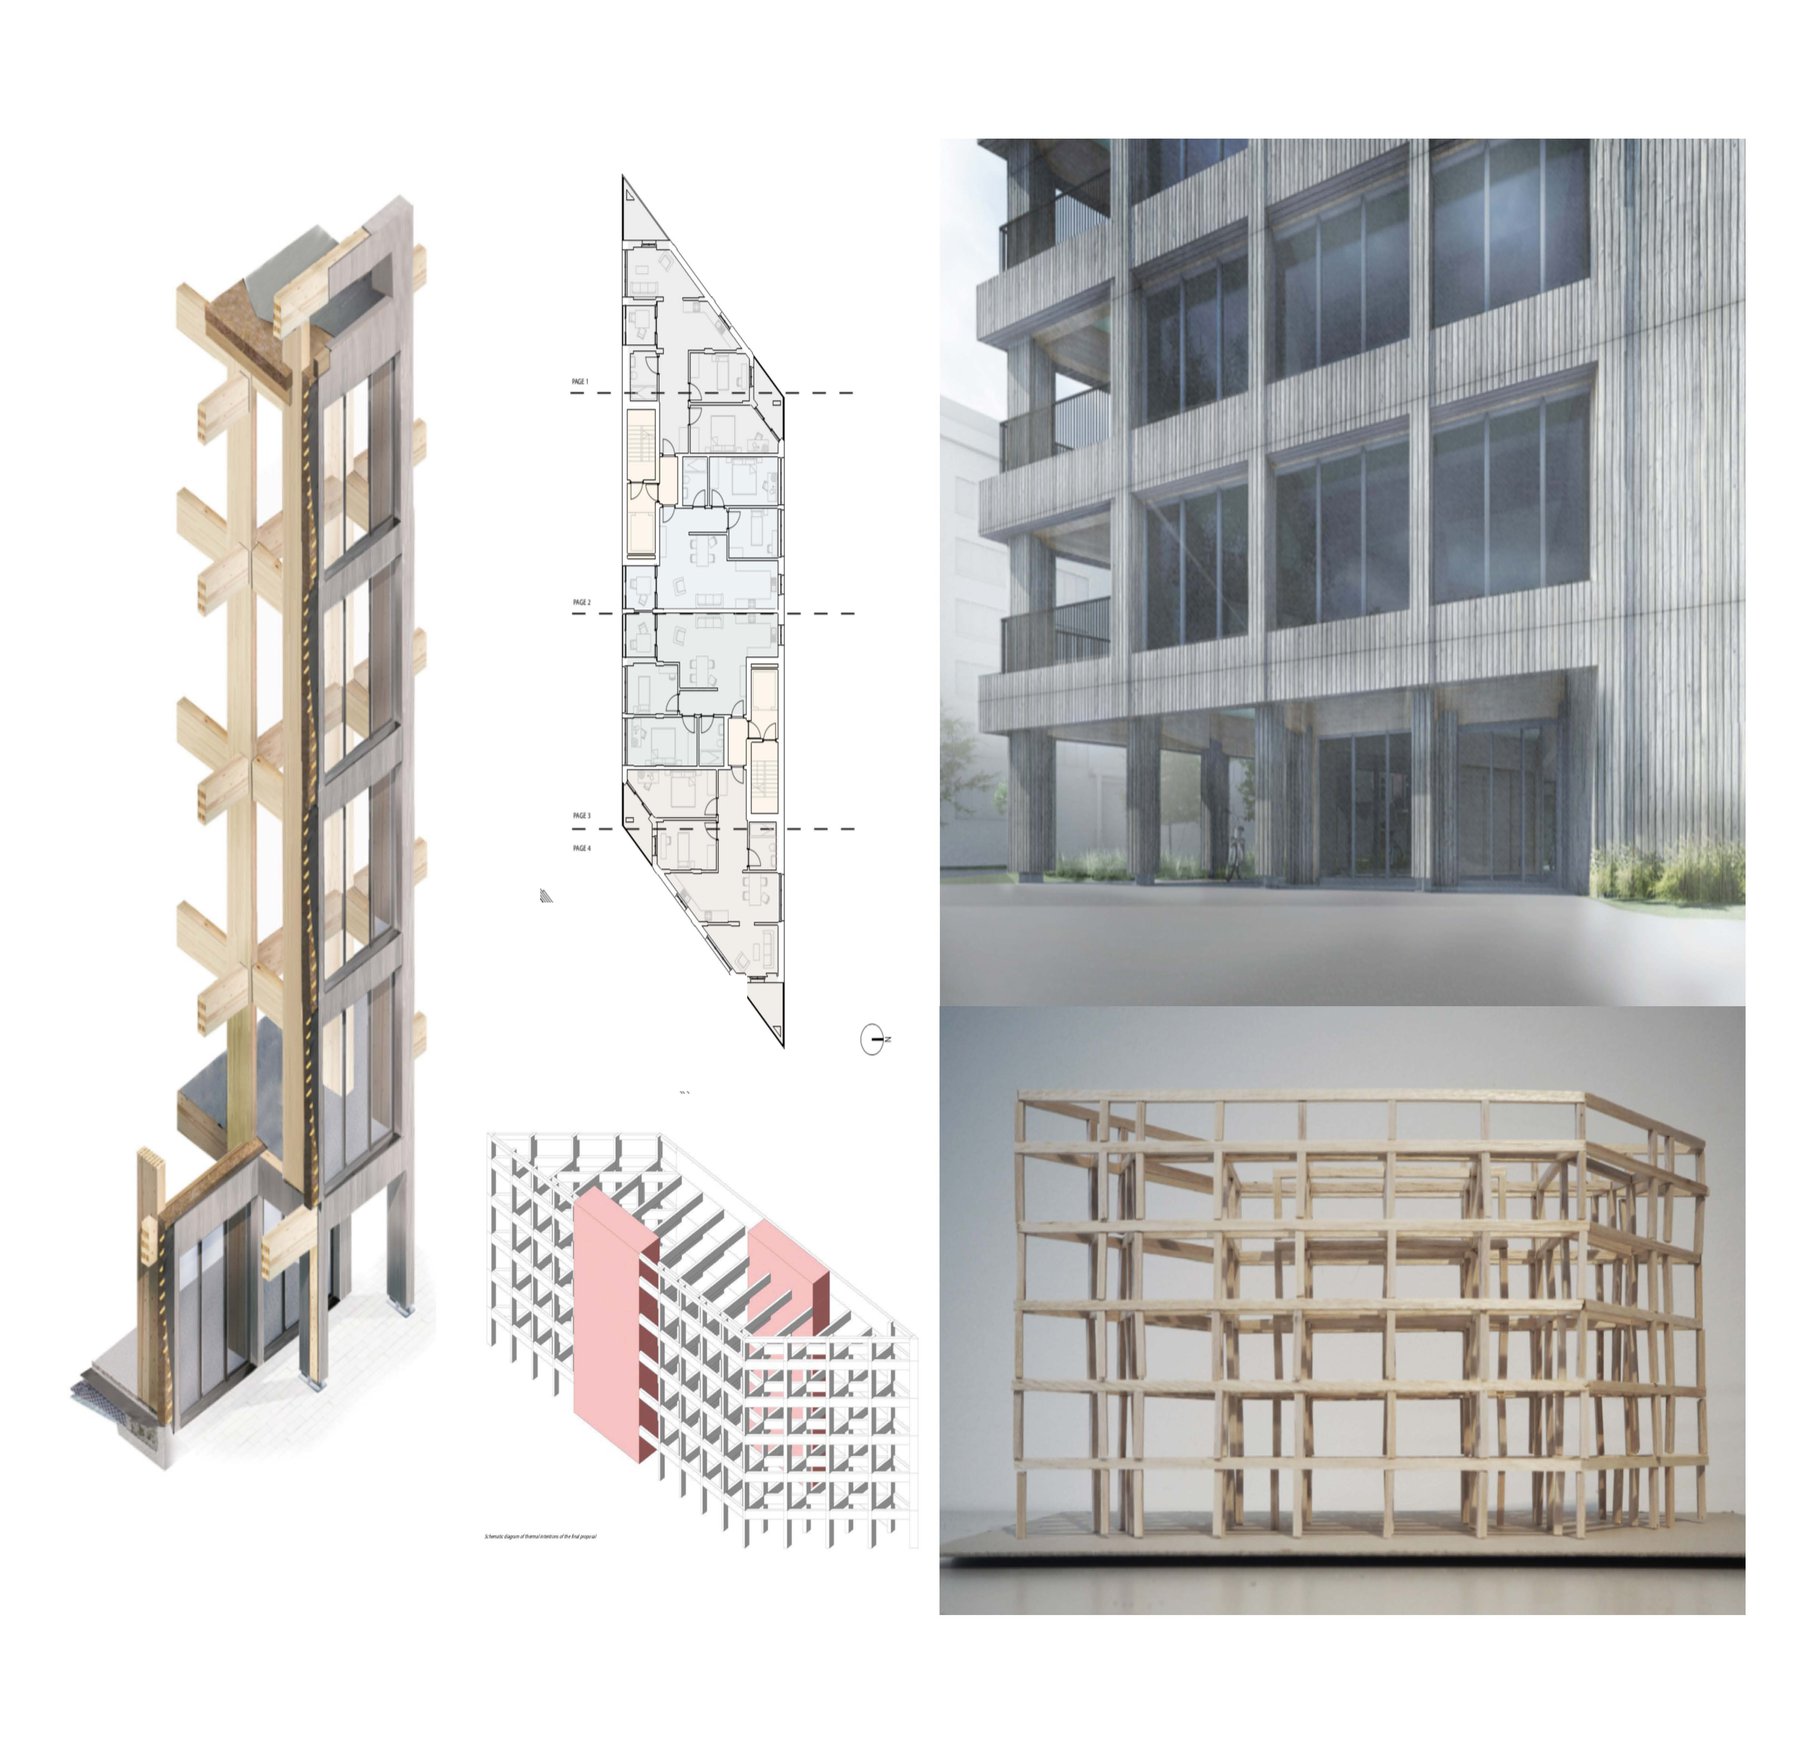 3d model of a building built with timber foundations.jpg